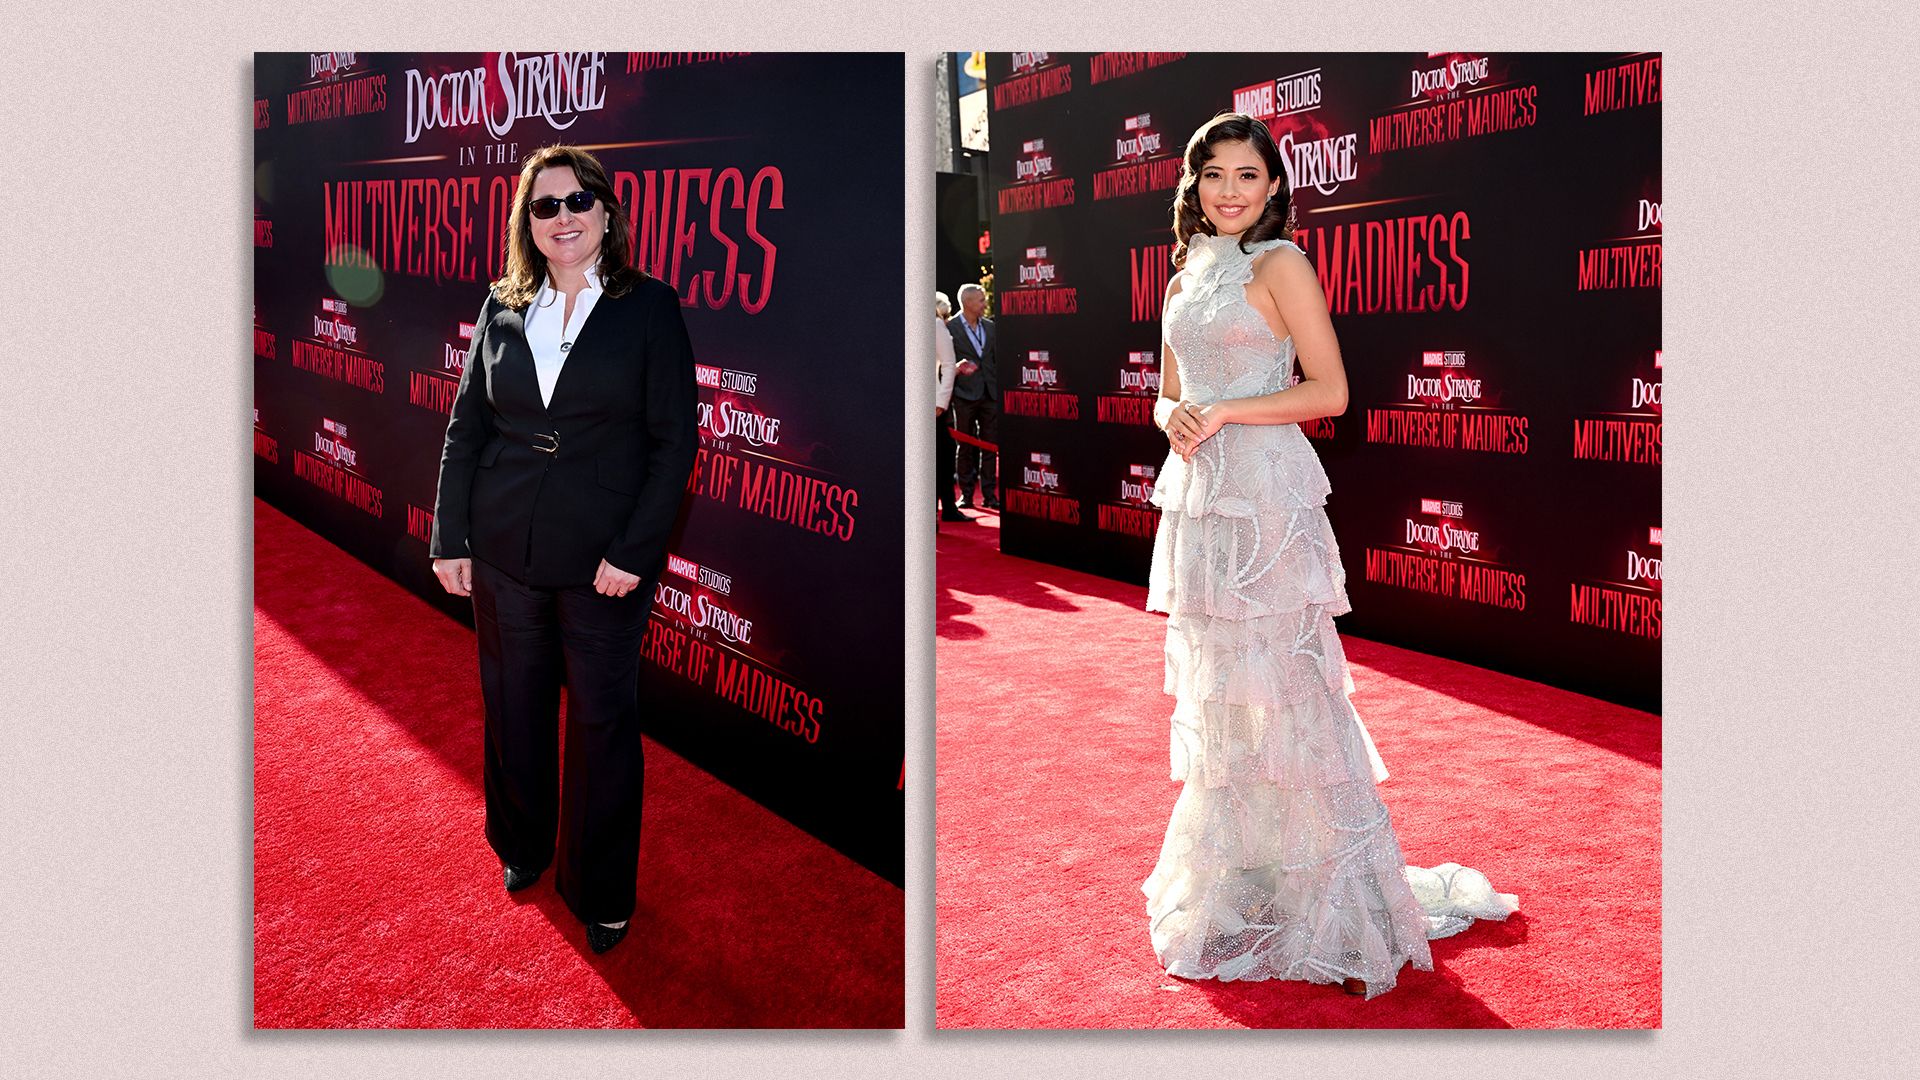 Two side-by-side photos show Victoria Alonso, left, posing at the premier of the Marvel's "Doctor Strange in the Multiverse of Madness" and to the right is Xochitl Gomez, who is in the movie